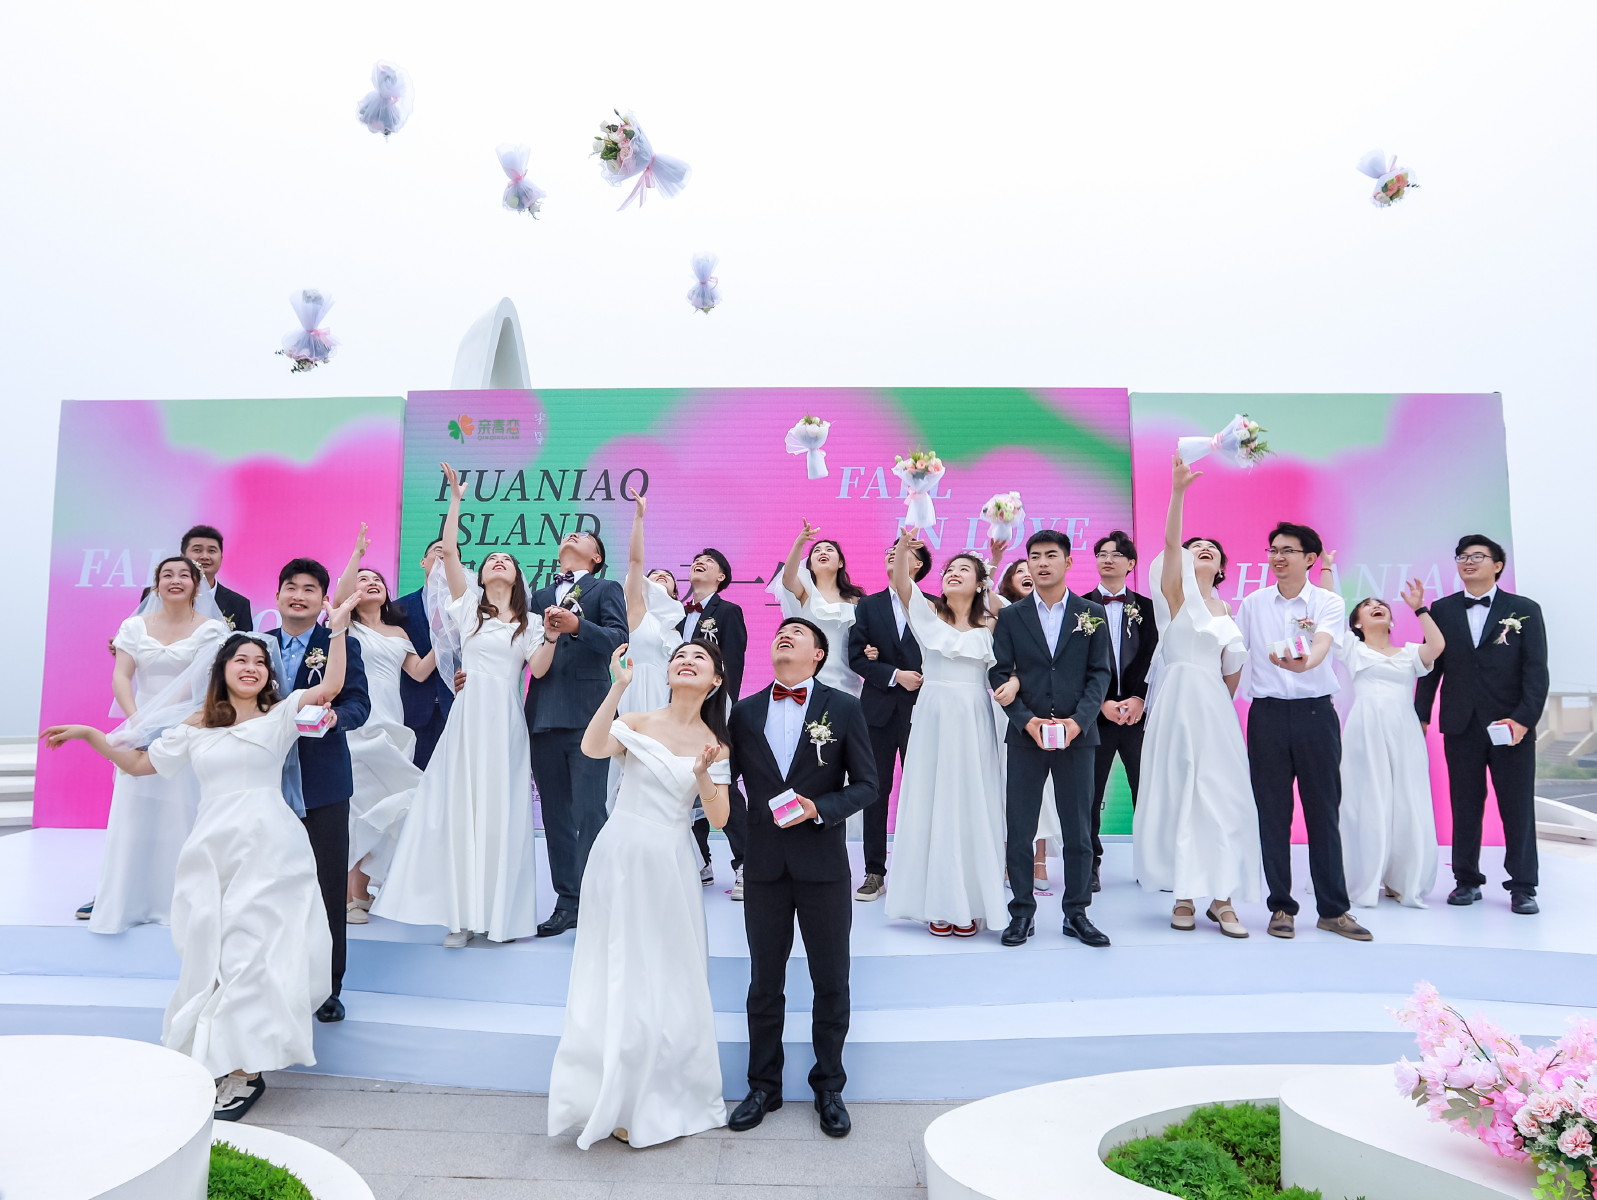 May 20th, on Shengsi Huaniao Island, 11 pairs of newlyweds from 11 cities across Zhejiang Province participated in a collective wedding ceremony